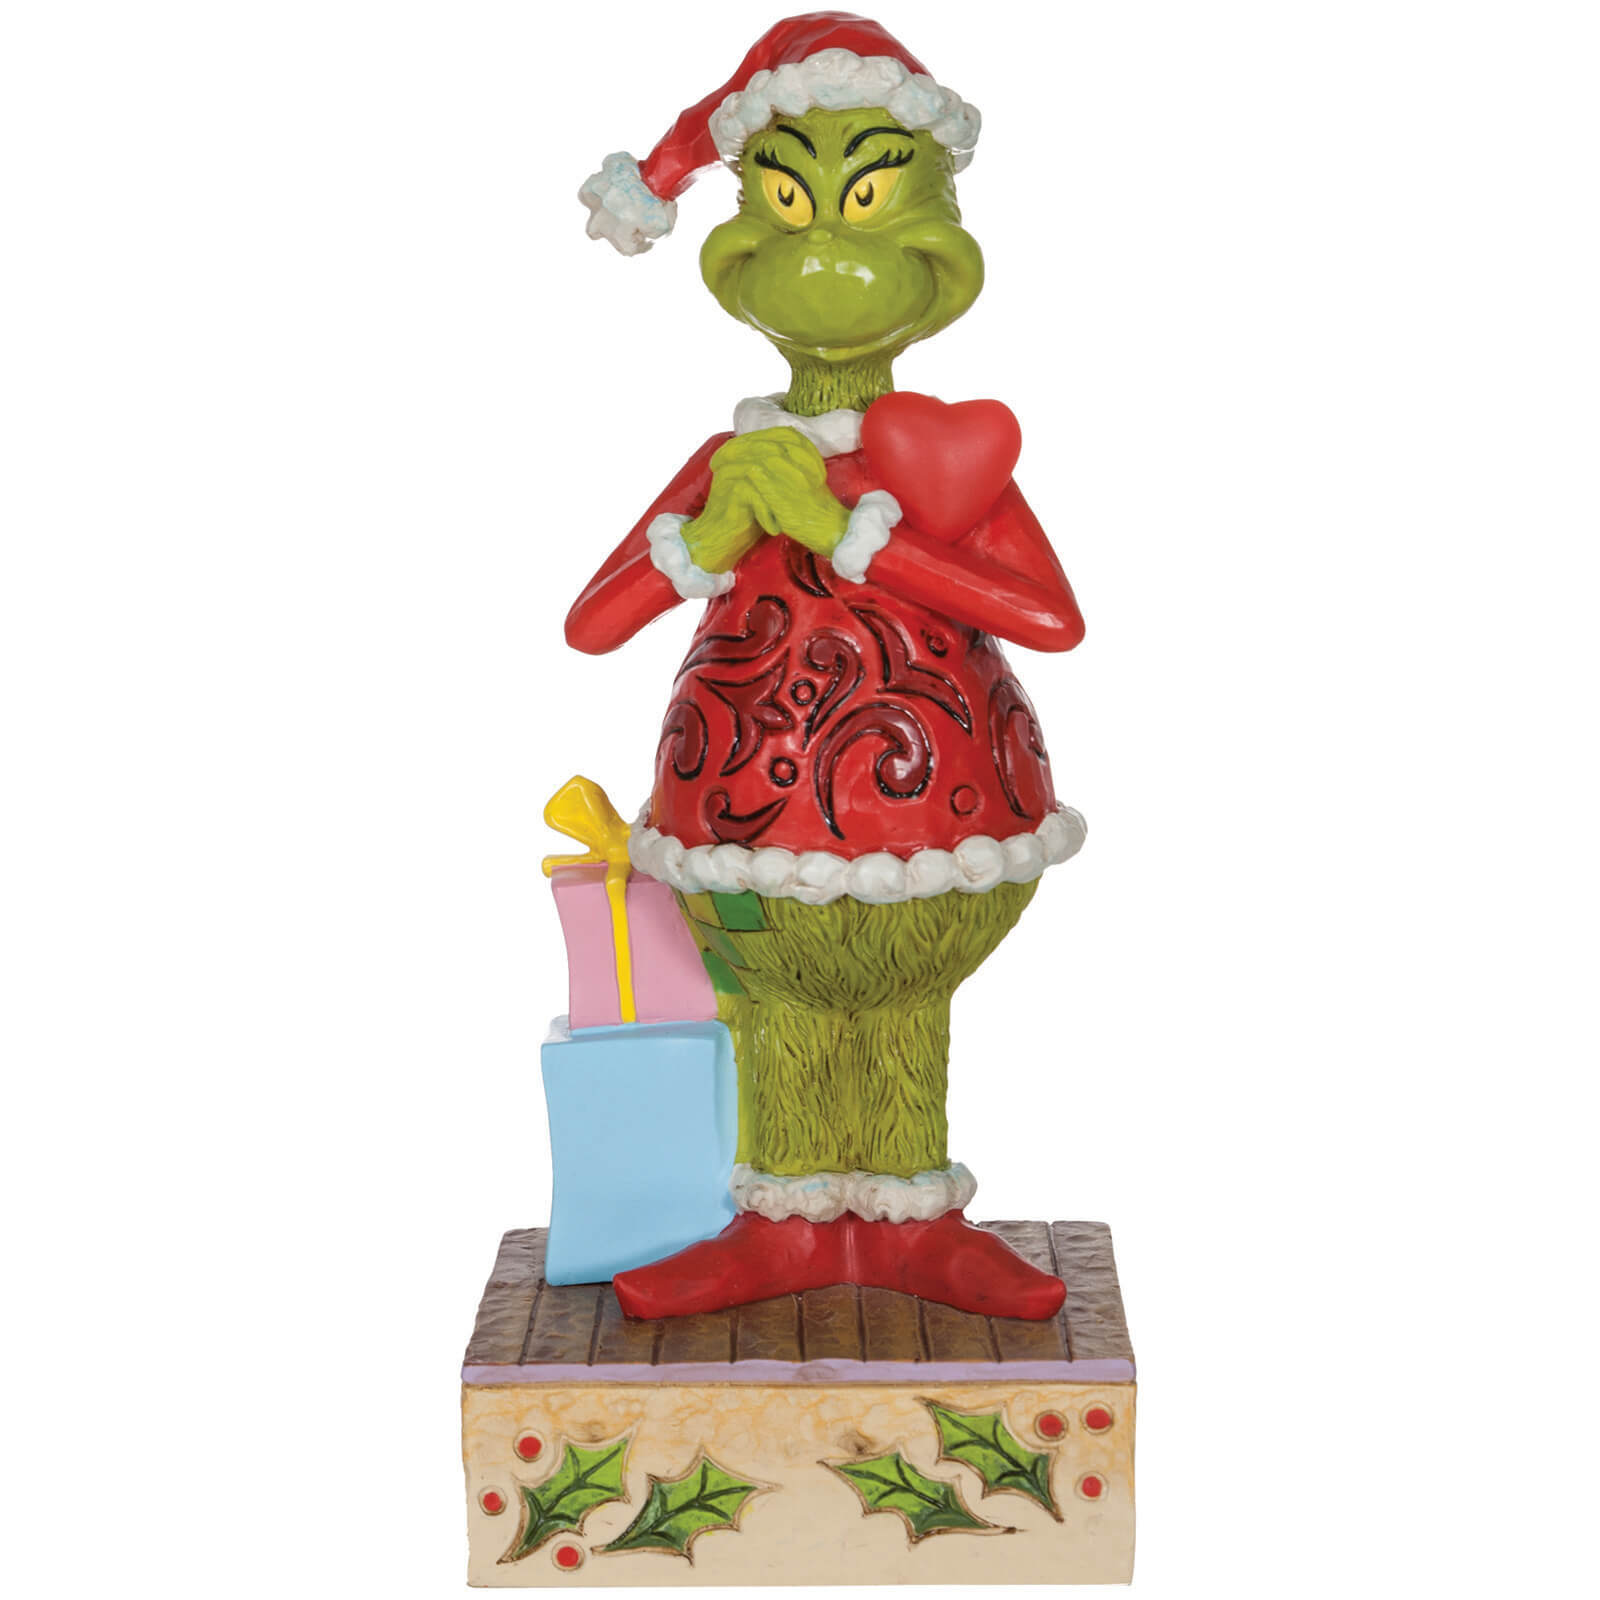 The Grinch Dr.Seuss by Jim Shore Happy Grinch with Blinking Heart Figurine